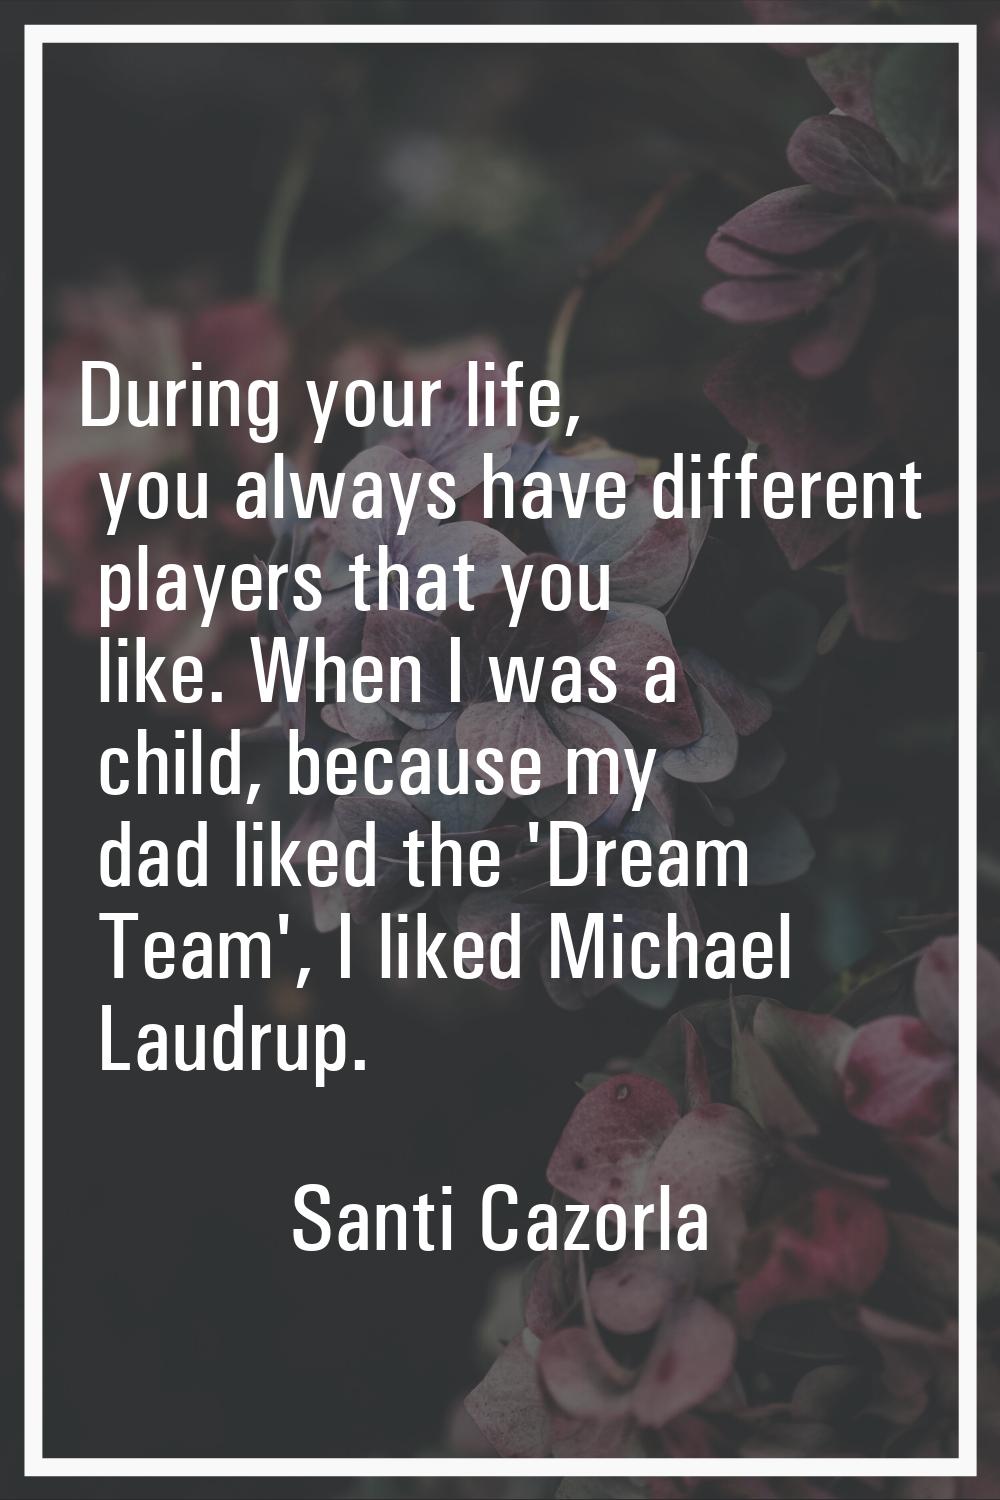 During your life, you always have different players that you like. When I was a child, because my d